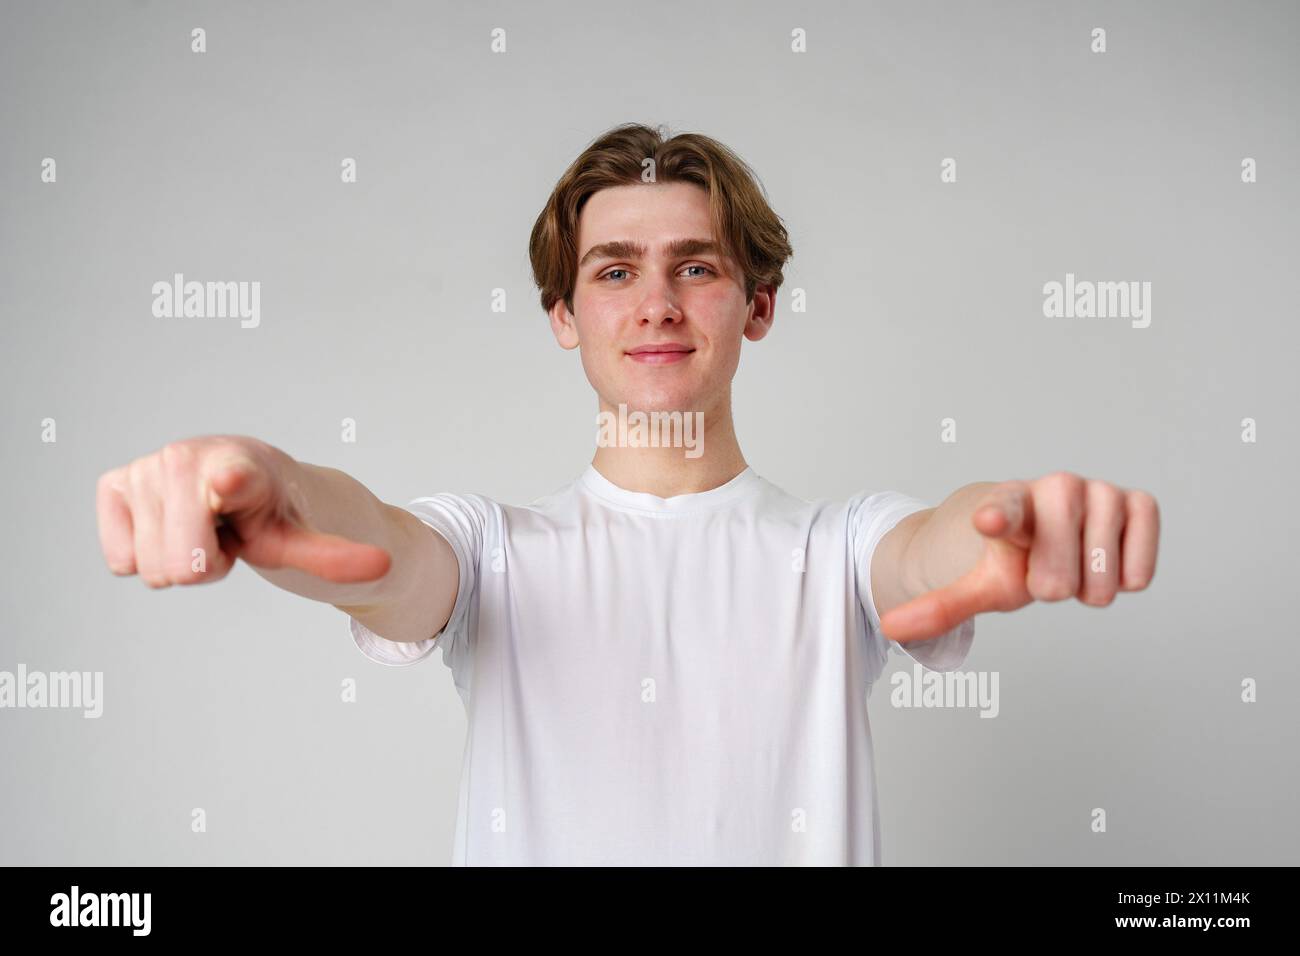 Young Man in White T-Shirt Pointing at Camera Stock Photo